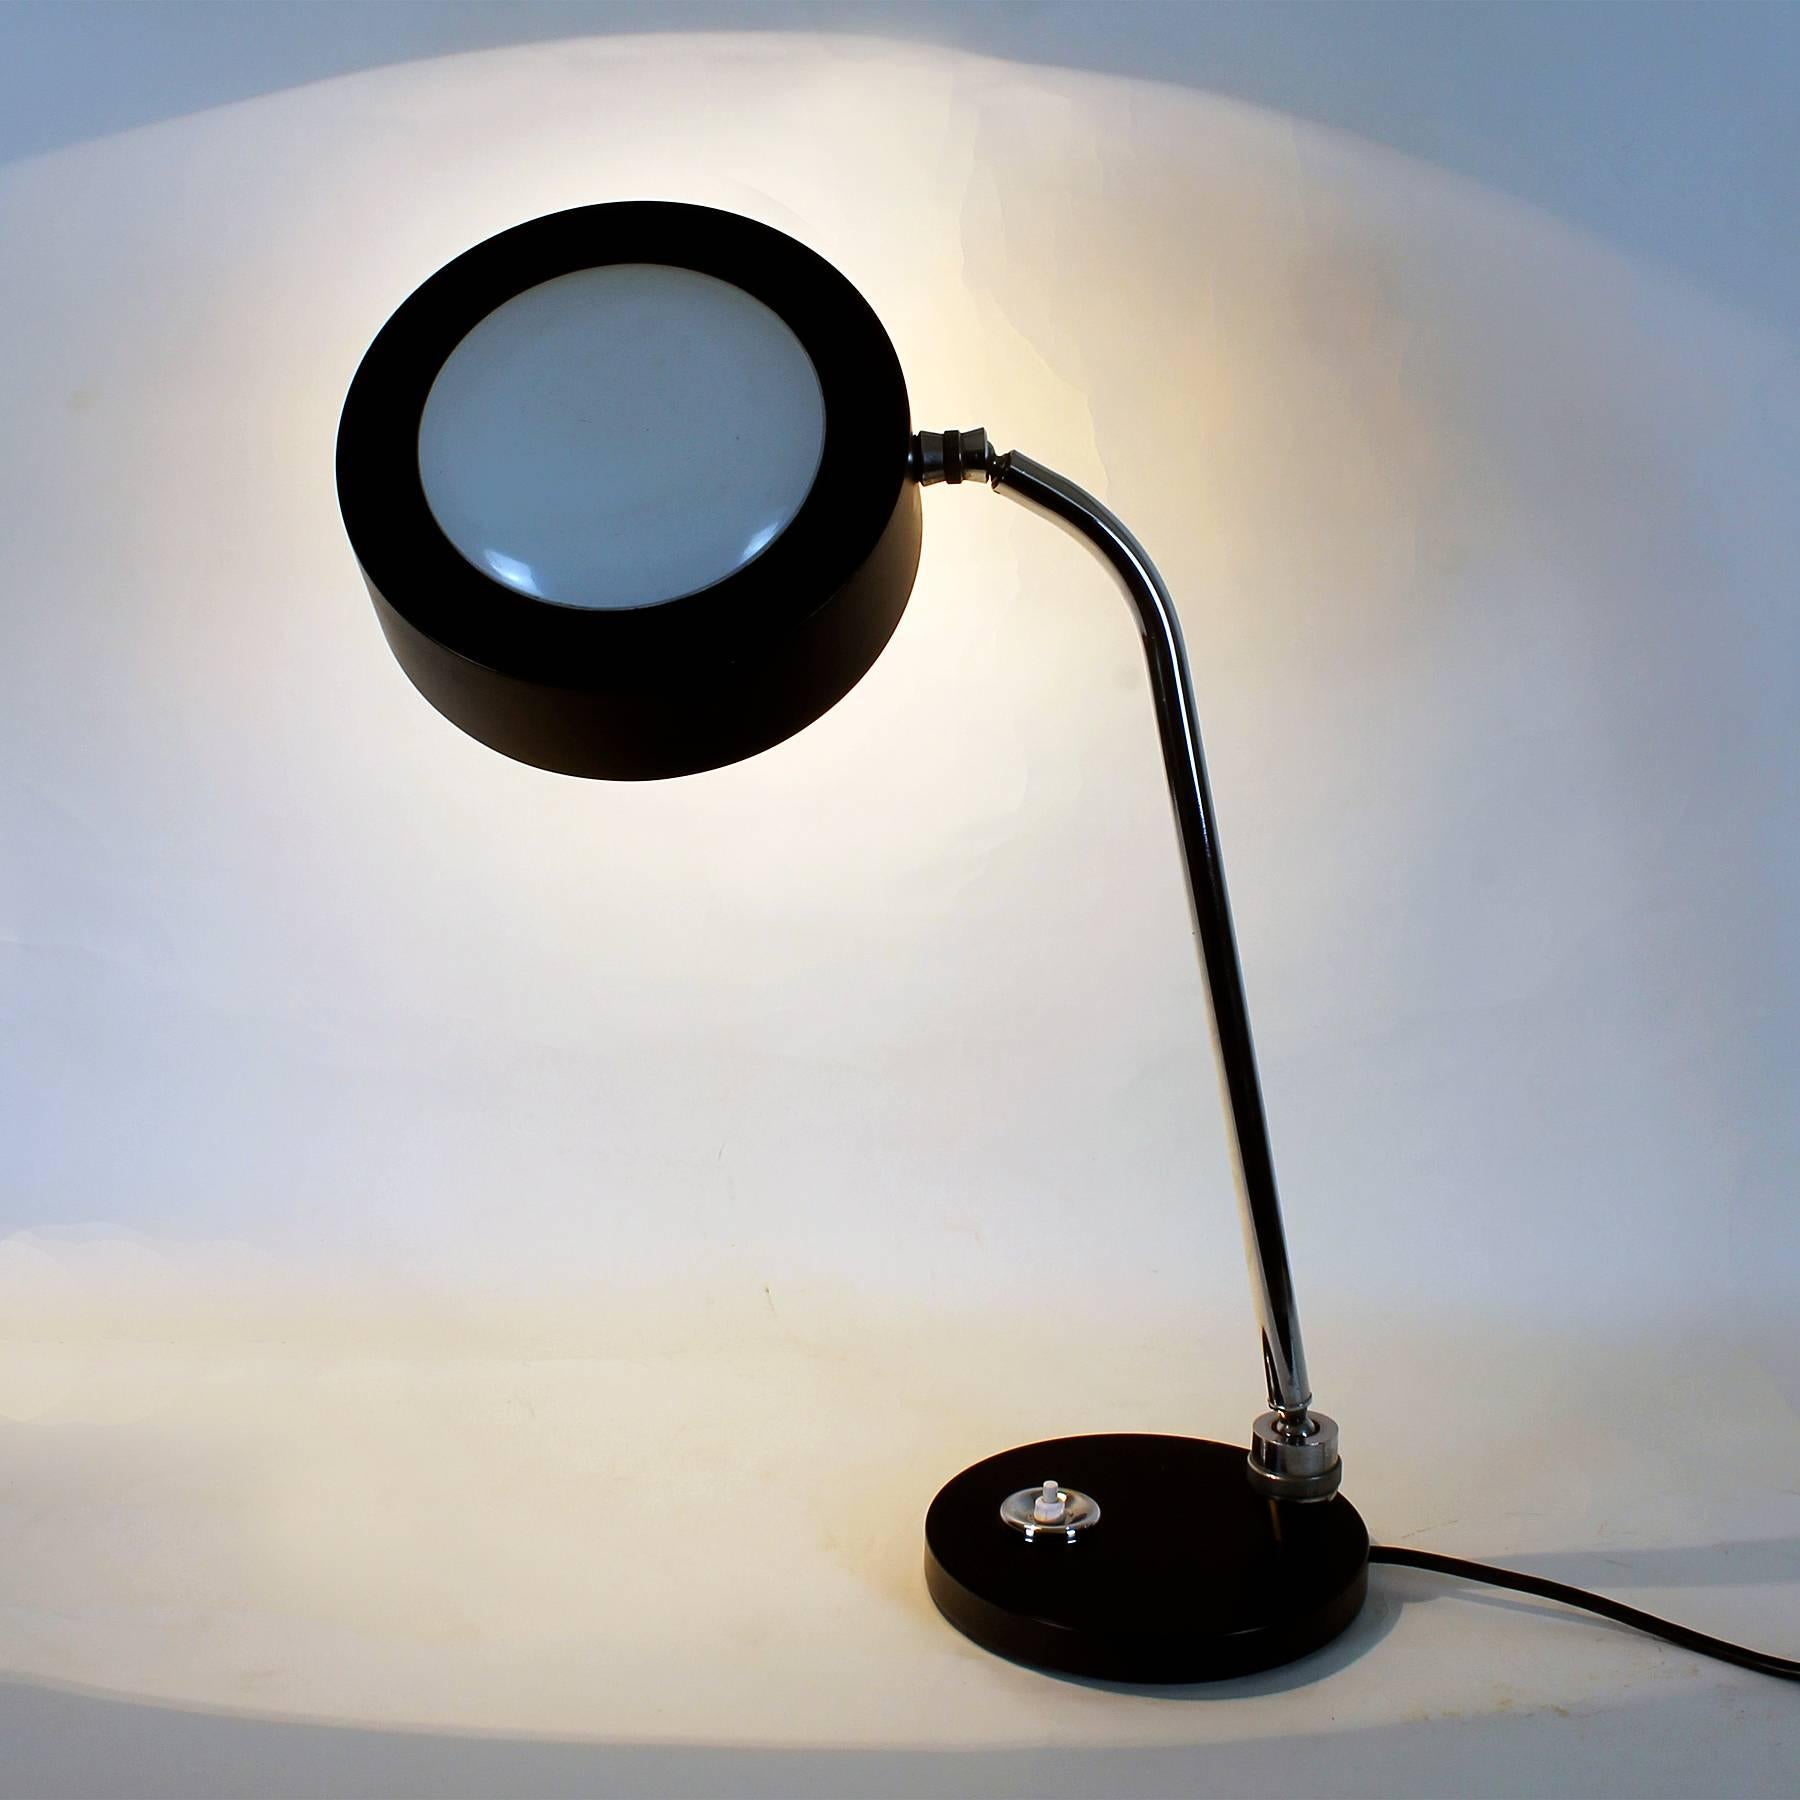 Pair of Mid-Century Modern Desk Lamps by André Mounique for Maison Jumo - France For Sale 3